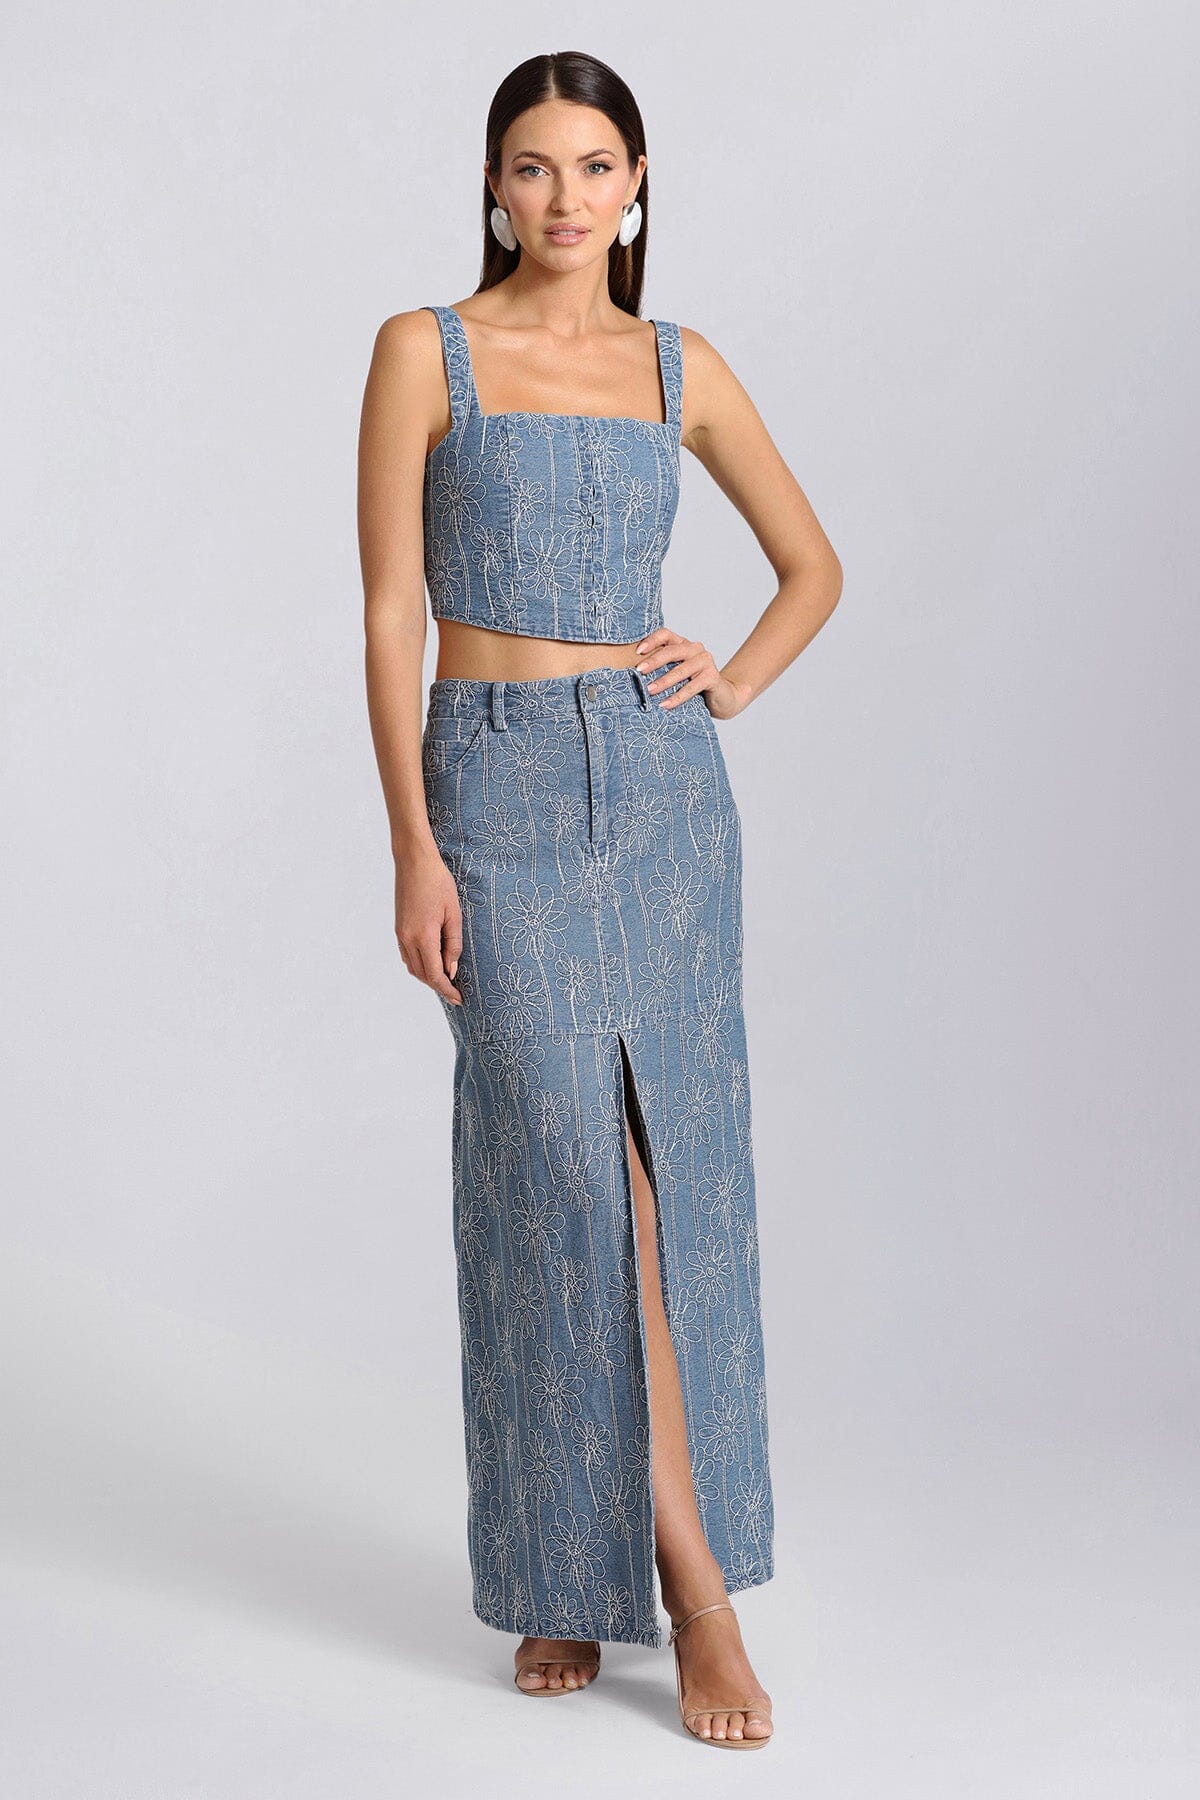 Light blue embroidered denim long maxi skirt - figure flattering office to date night skirts for ladies by Avec Les Filles